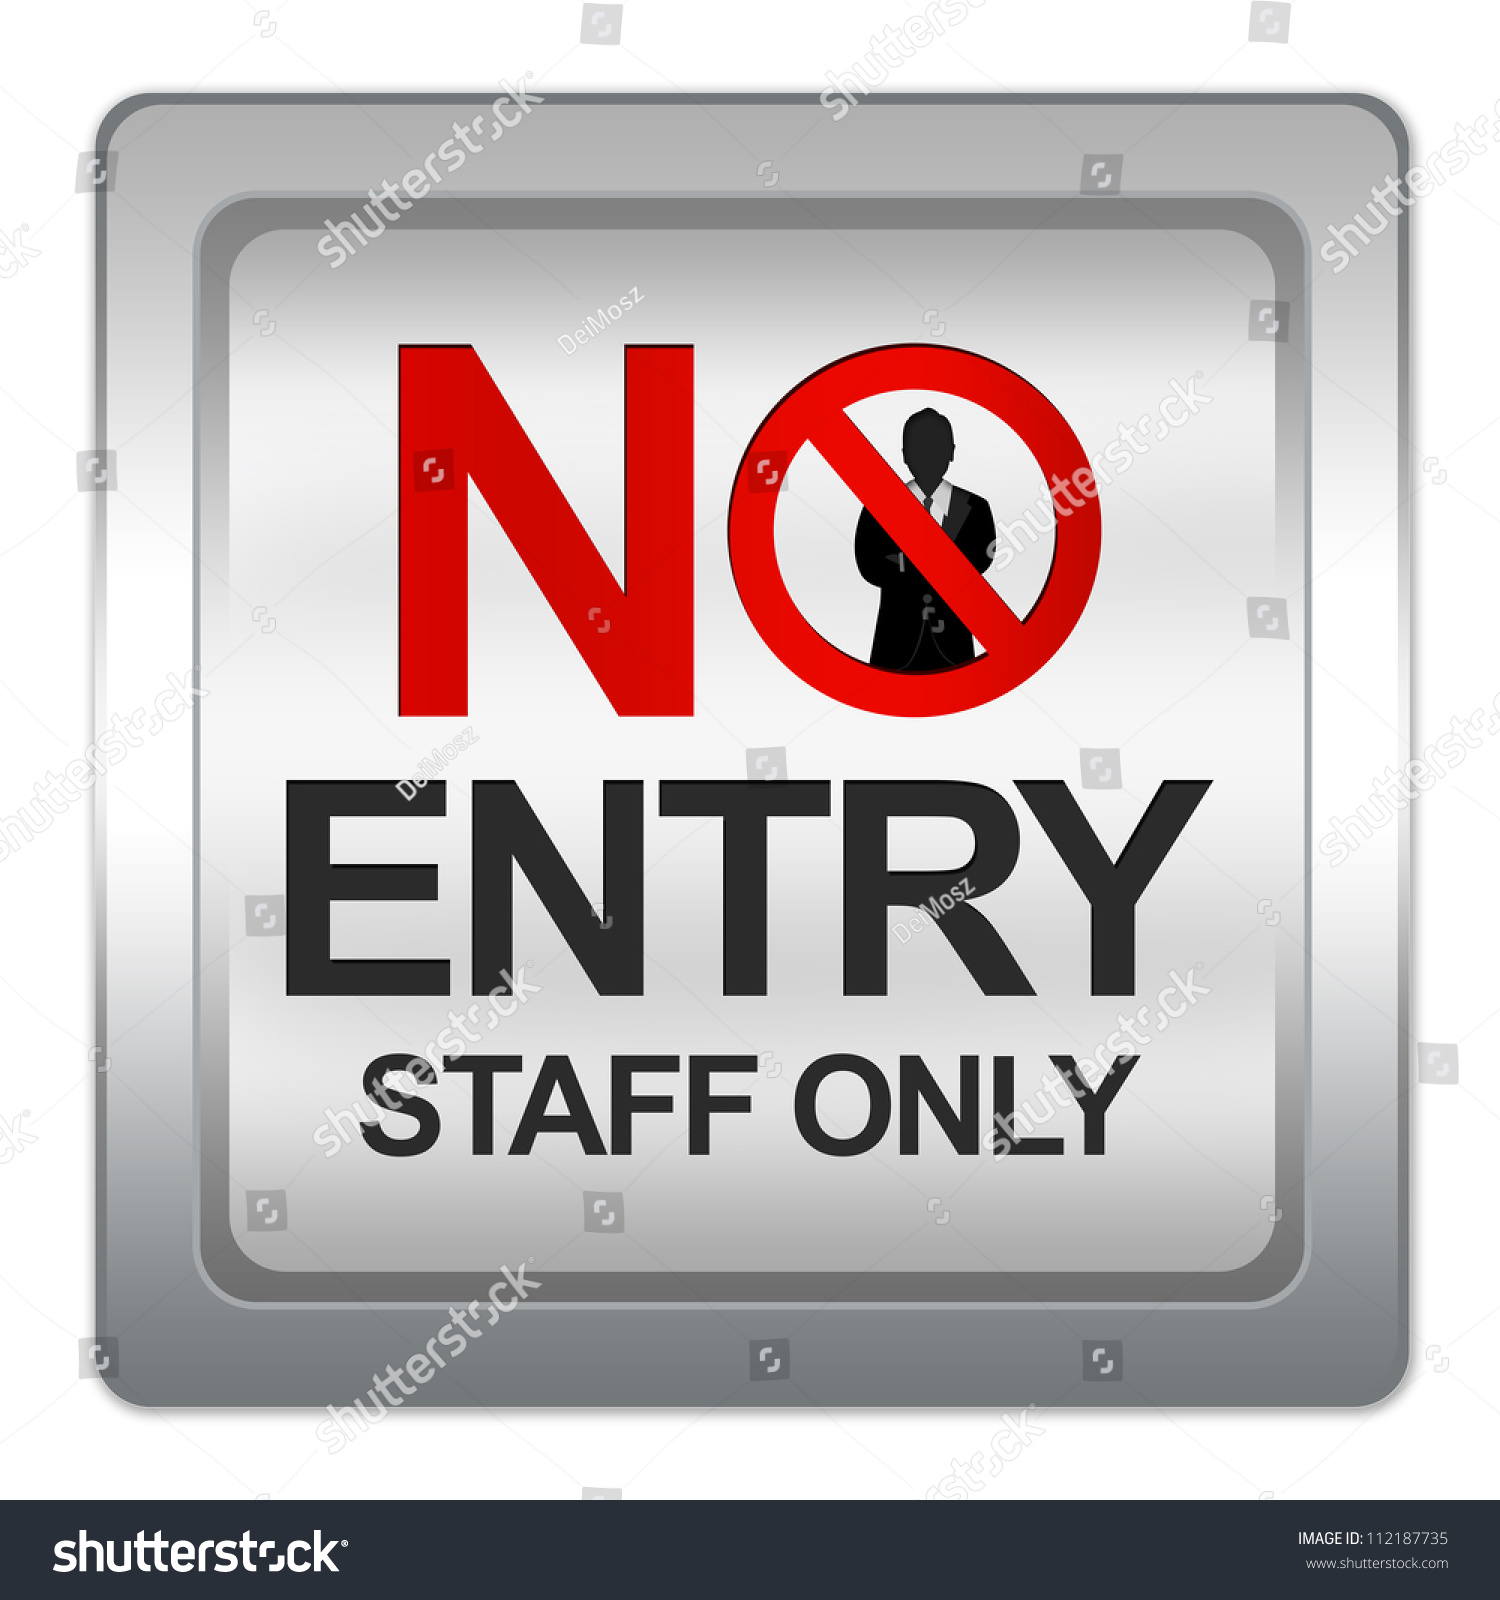 NO ENTRY STAFF ONLY SIGN 